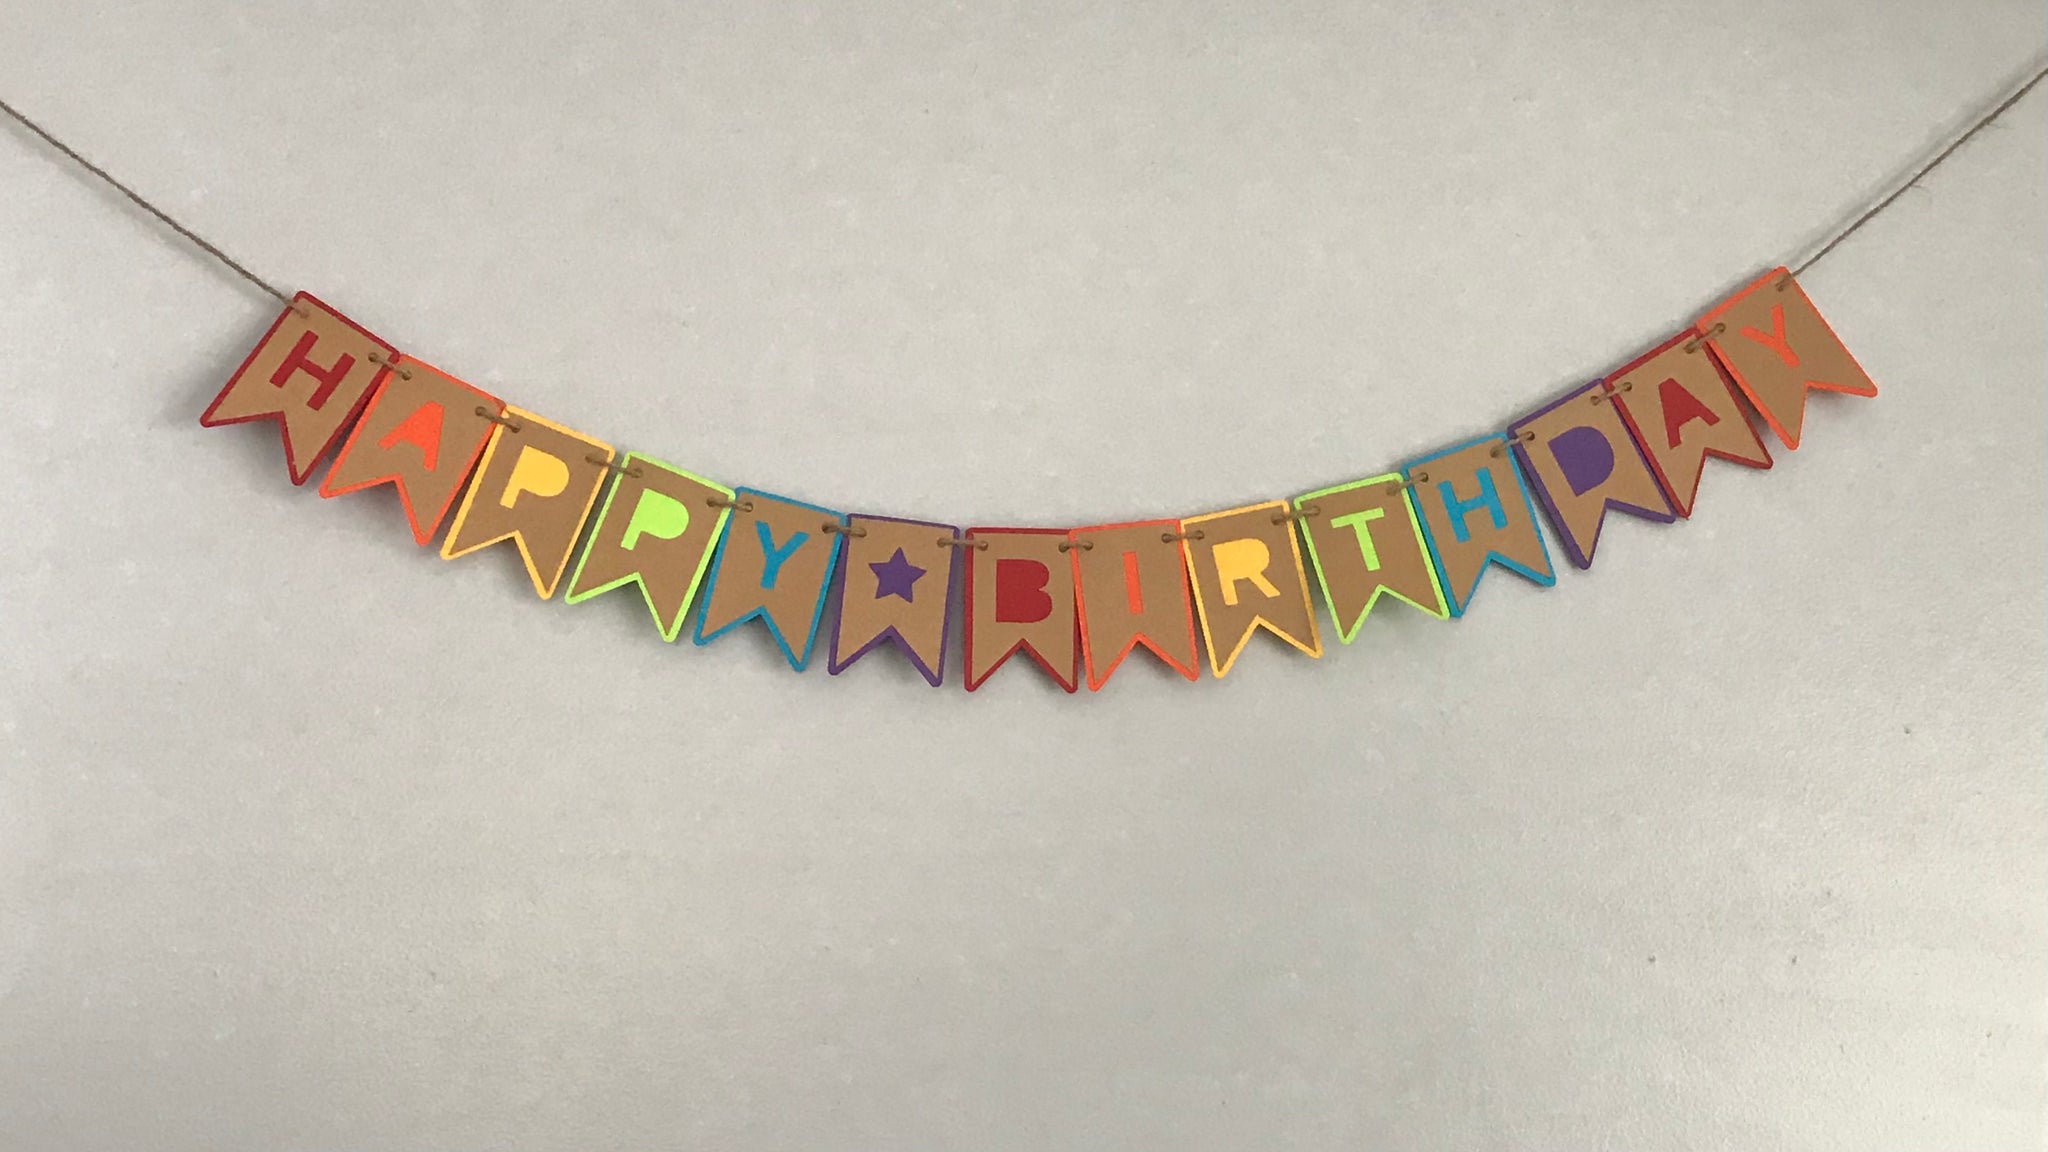 A happy Birthday banner is hung on hemp against a light grey background